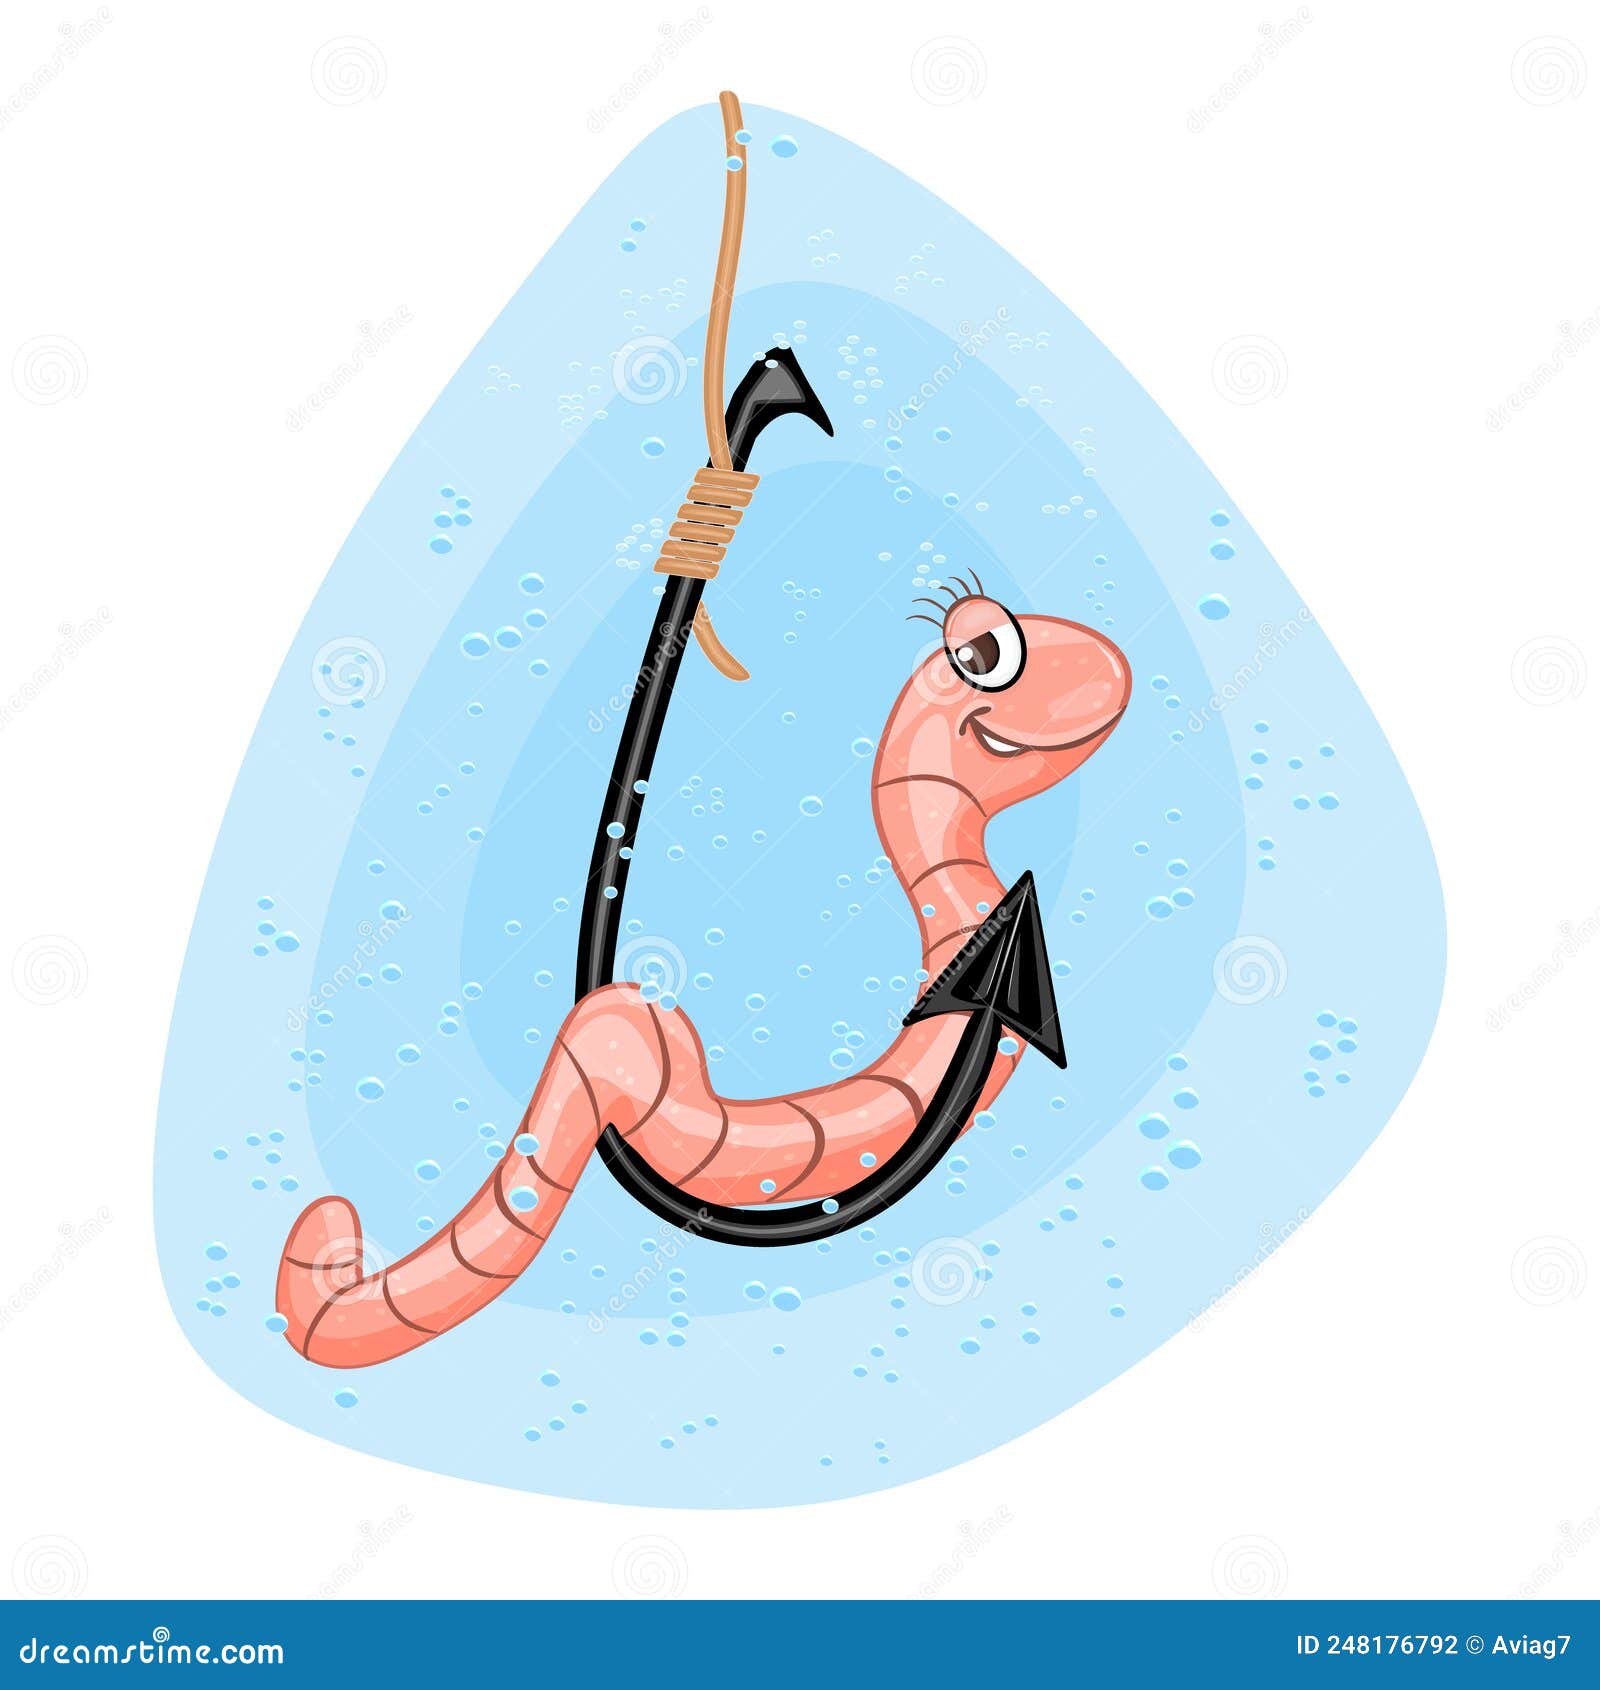 Earthworm on Hook Isolated on White Background. Cartoon Earthworm,  Fishhook, Water and Bubbles. Stock Vector - Illustration of fishing, crawl:  248176792